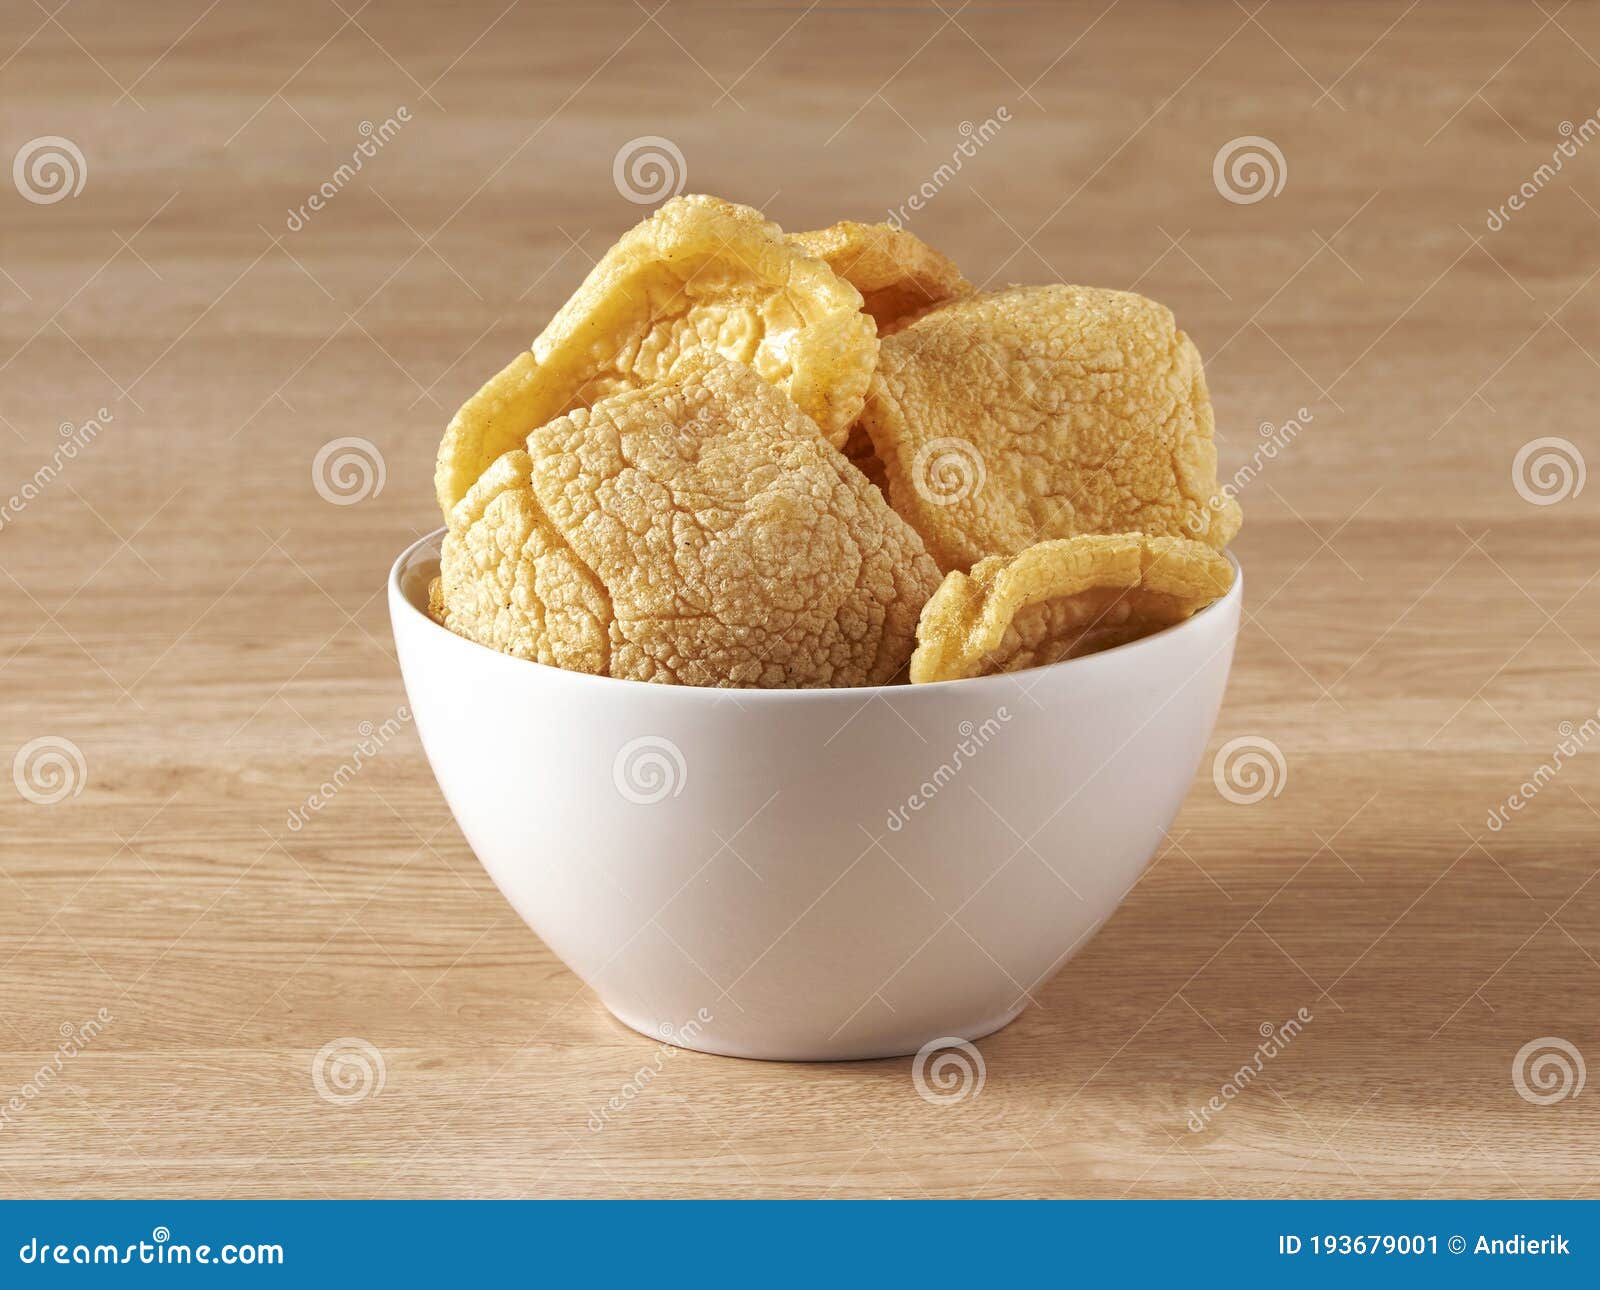 brown crackers served in a white bowl